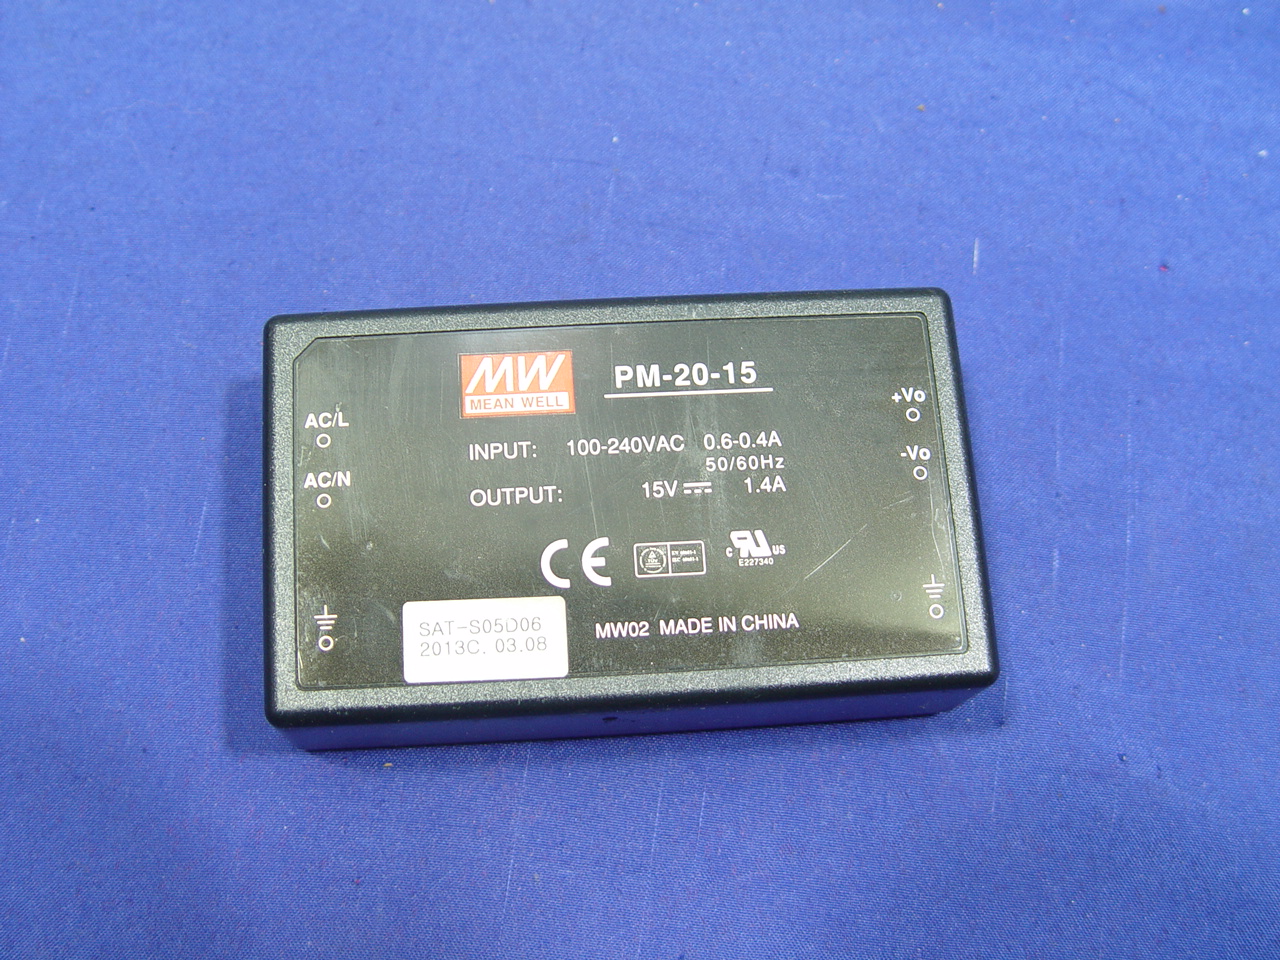 [Y736B] MEAN WELL PCB TYPE PM-20-15 DC 15V 1.4A